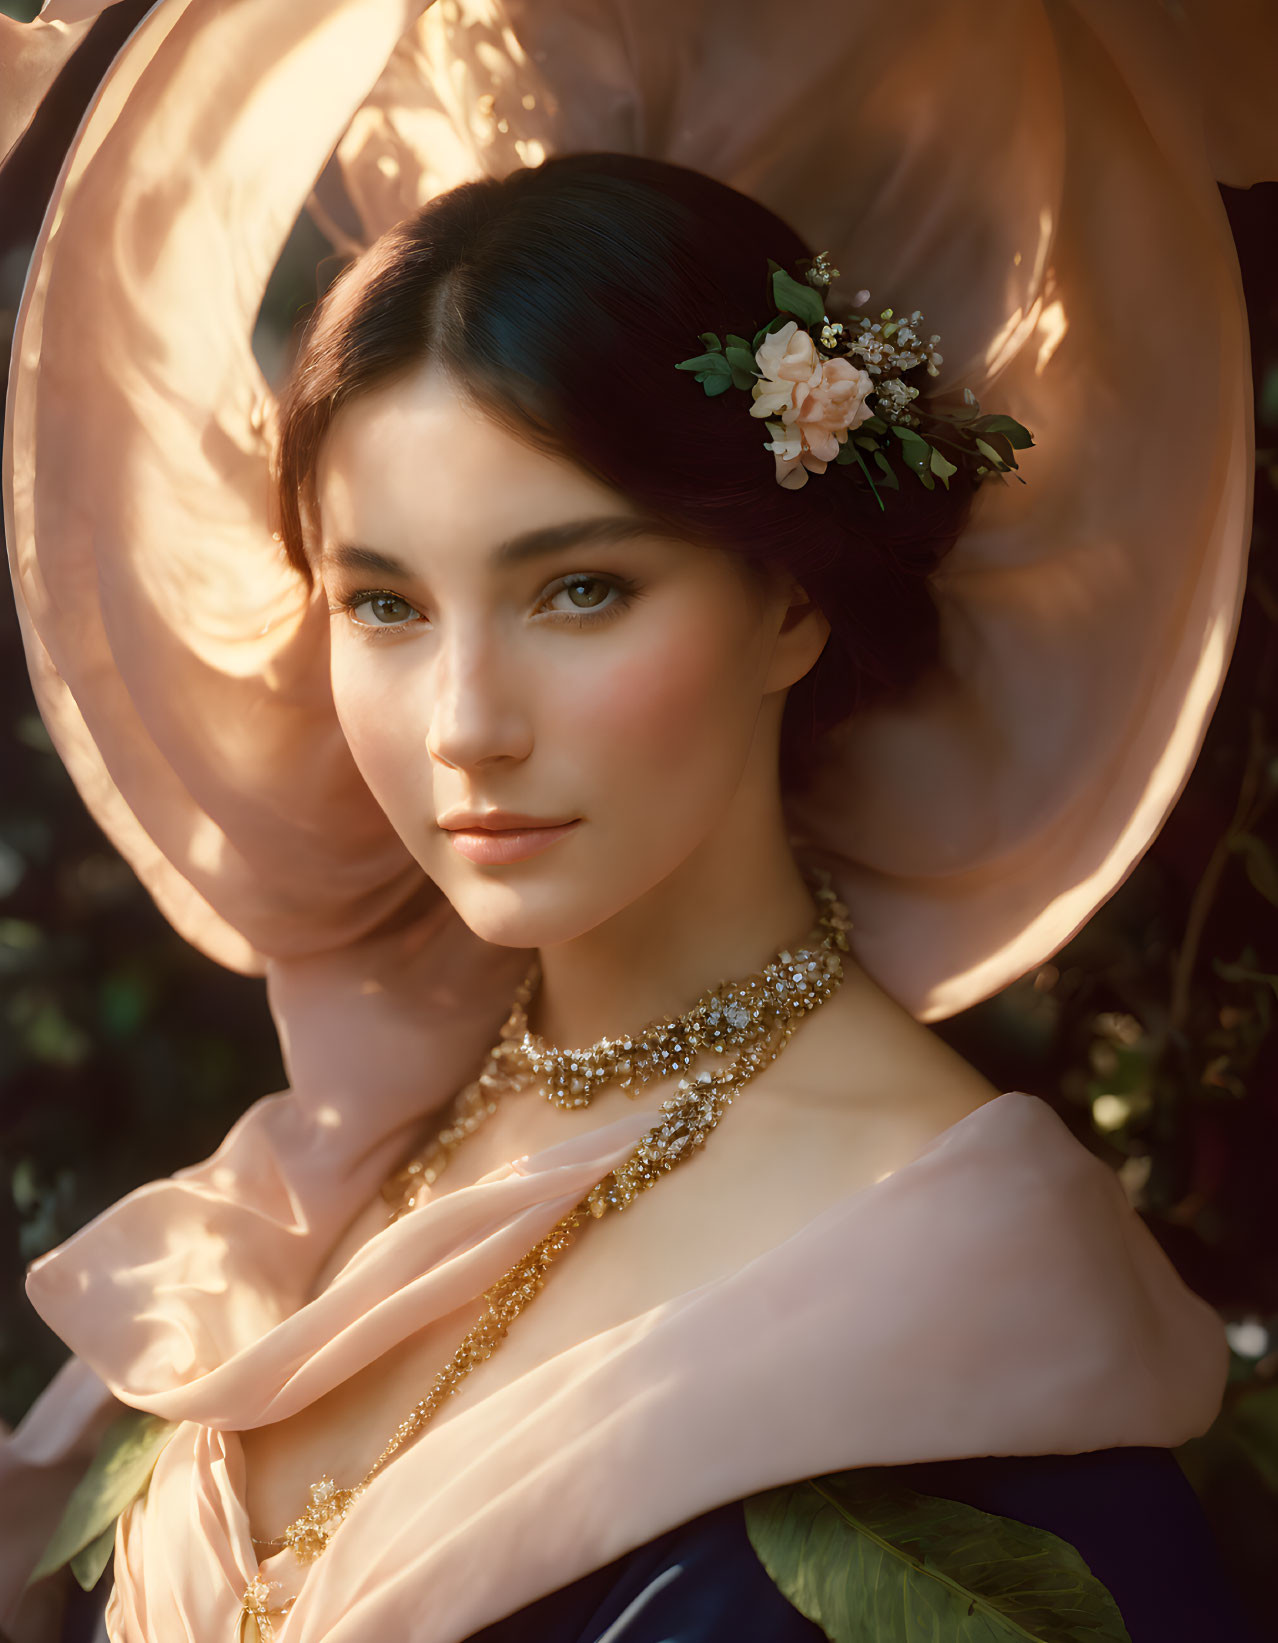 Woman in Peach Outfit with Floral Hairpiece and Golden Necklace in Sunlit Setting